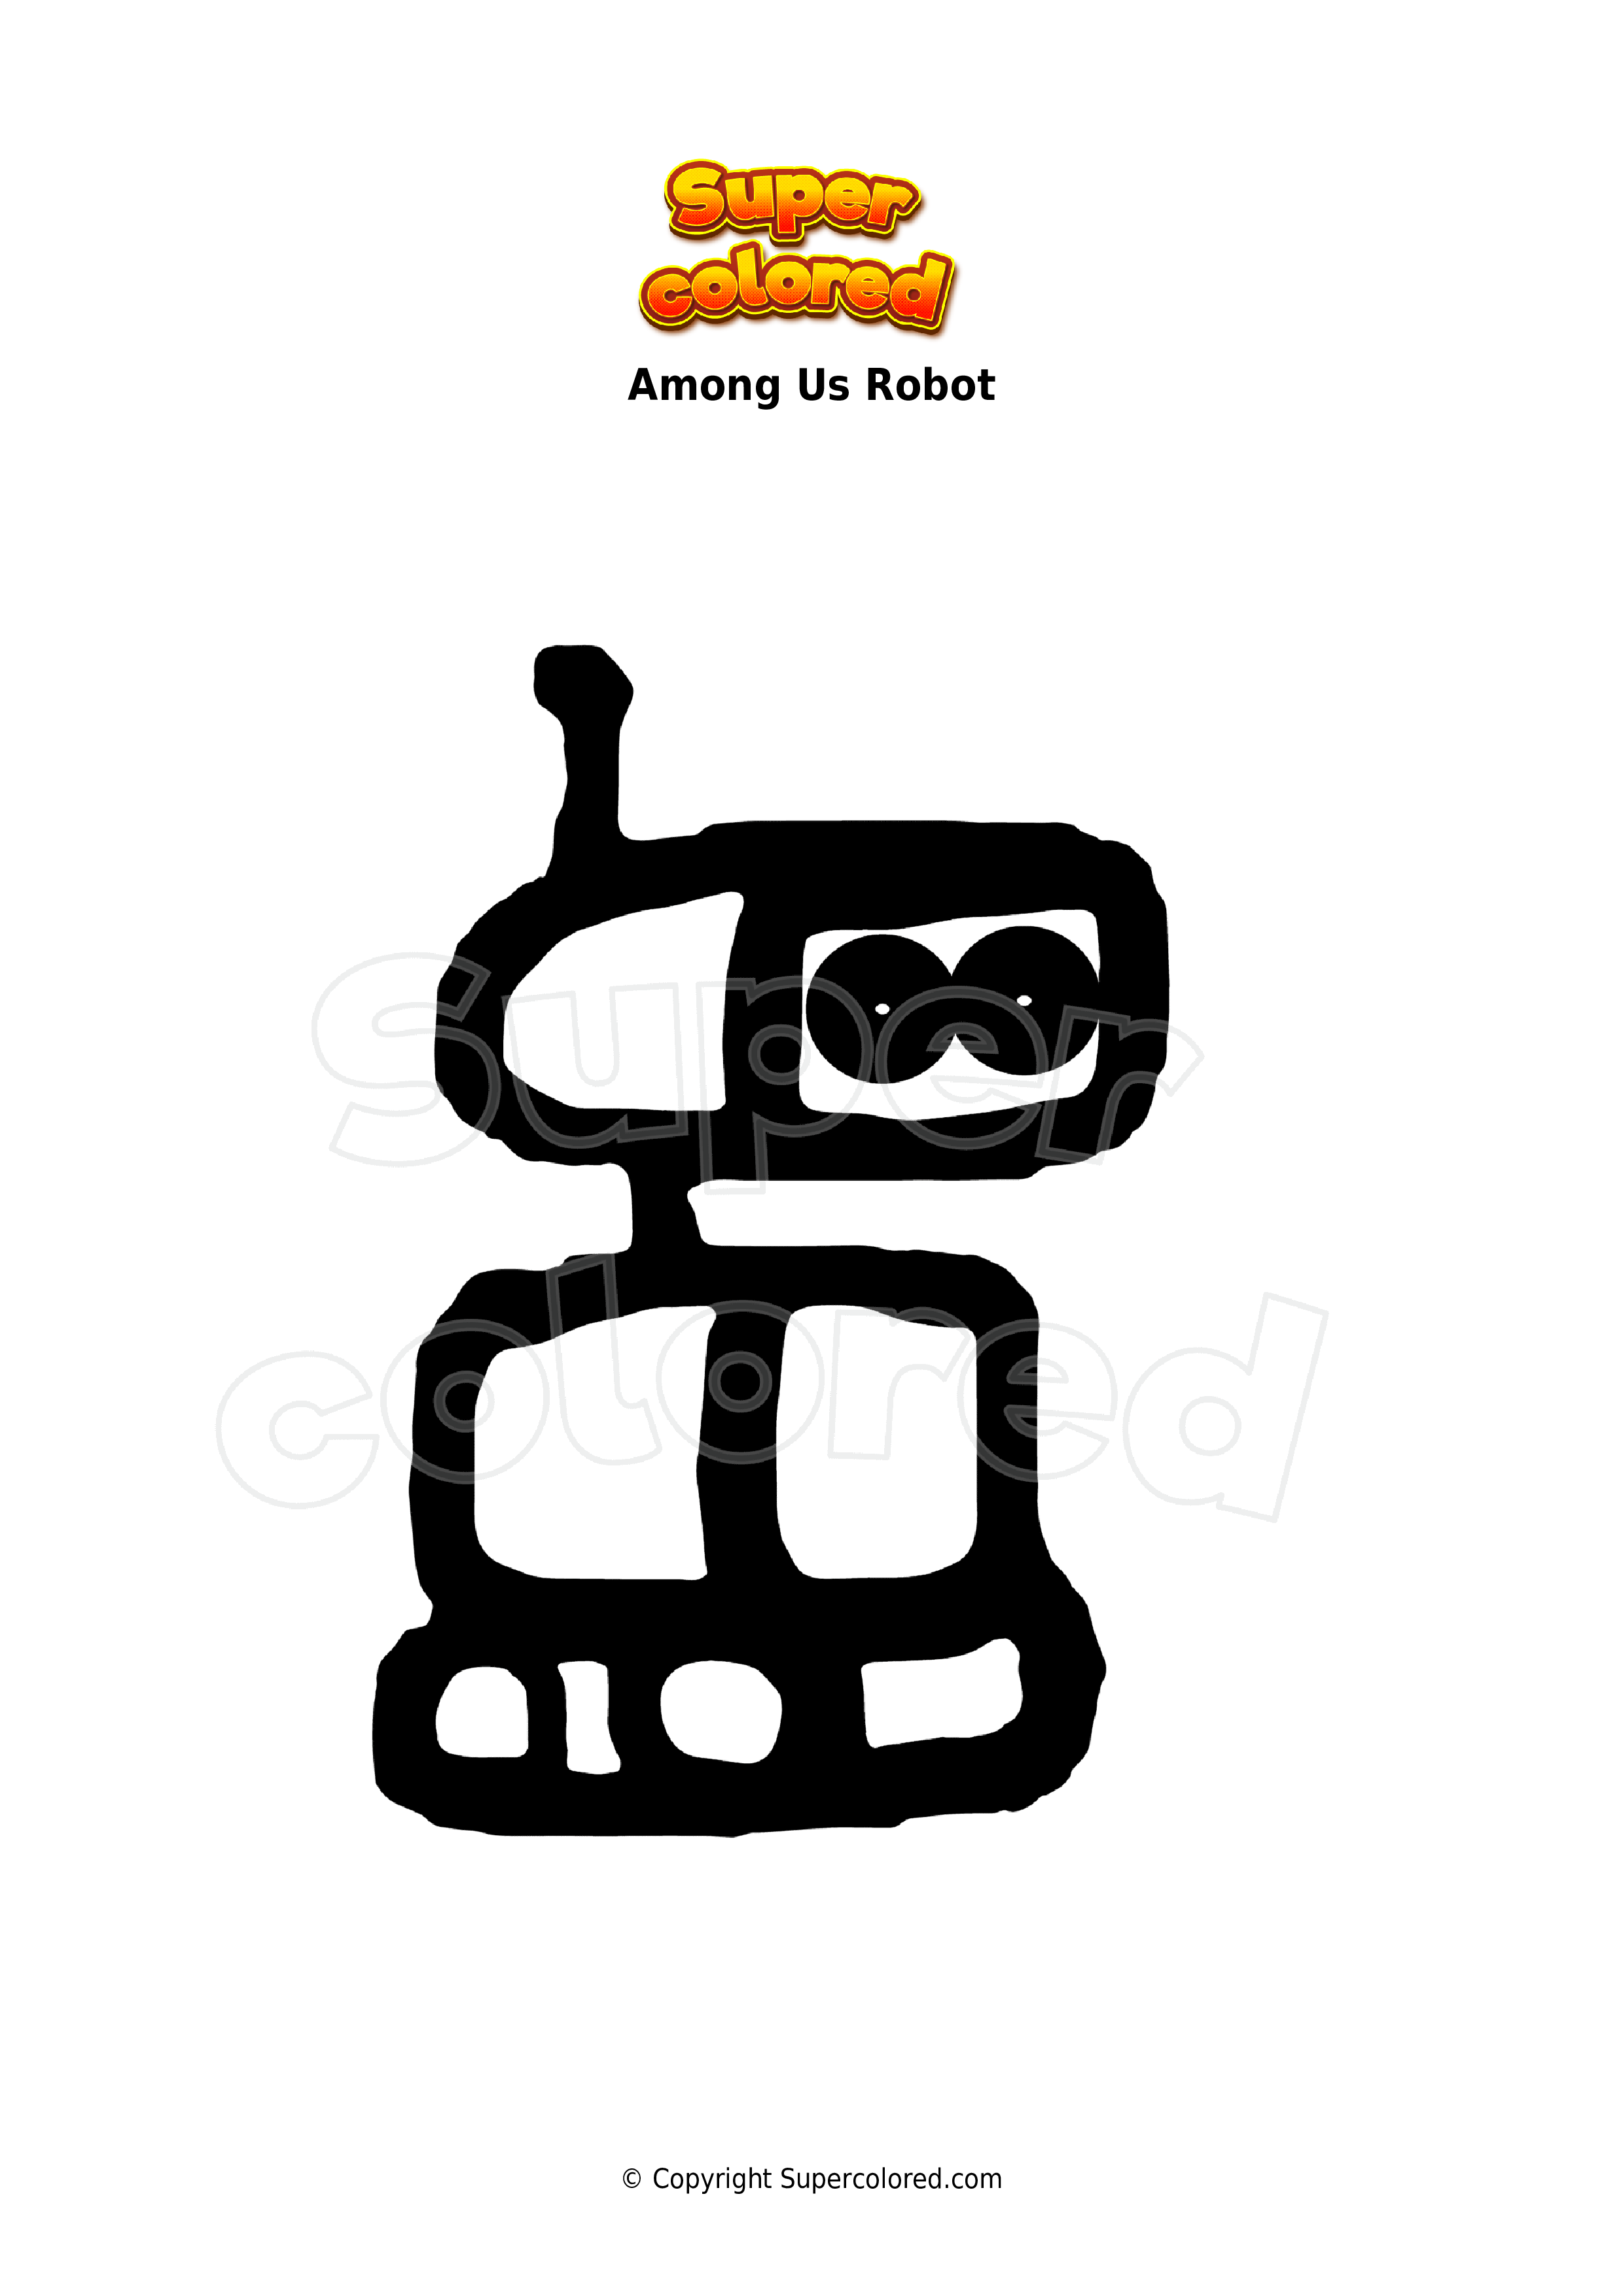 Coloring page Among Us Robot   Supercolored.com